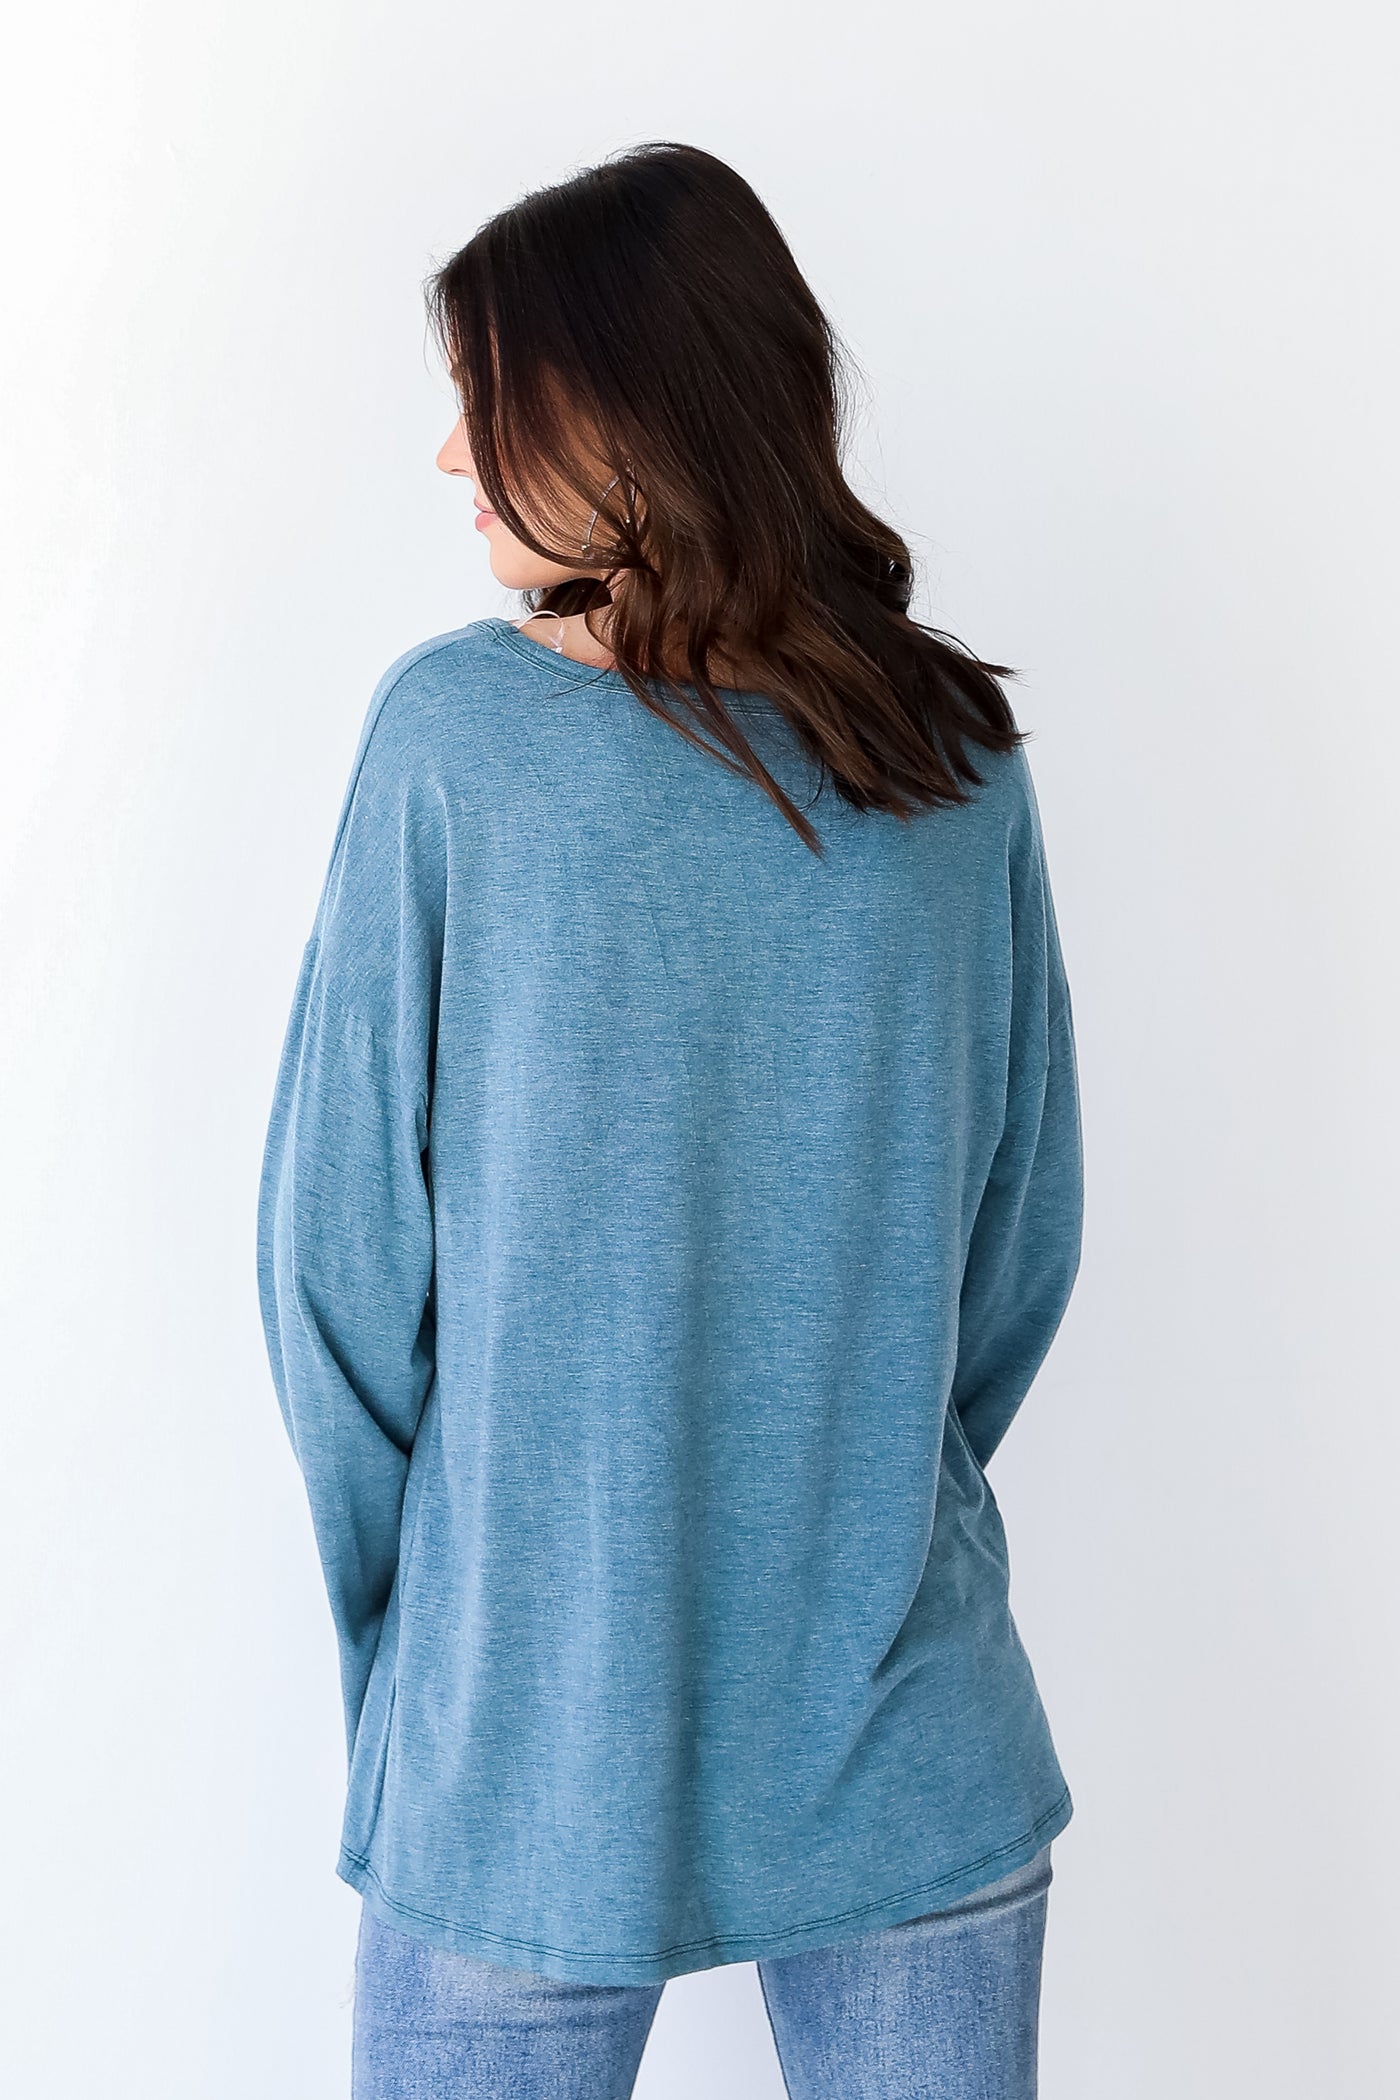 Knit Top in teal back view